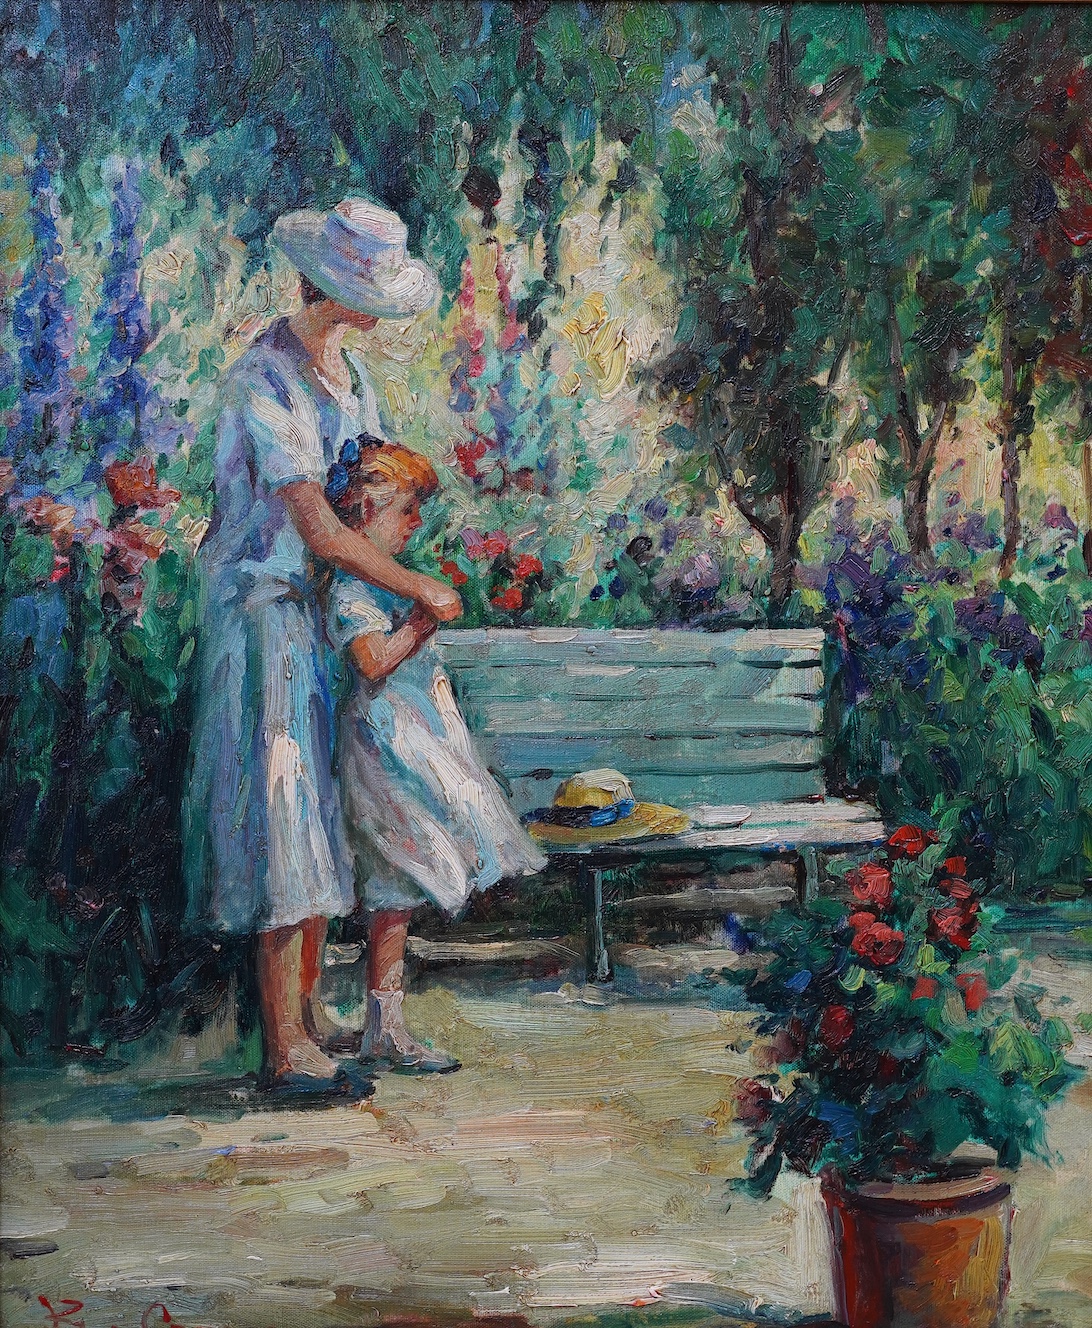 B. Crom?, oil on canvas, possibly over a print, Mother and daughter, signed, 58 x 49cm, ornate gilt frame. Condition - good